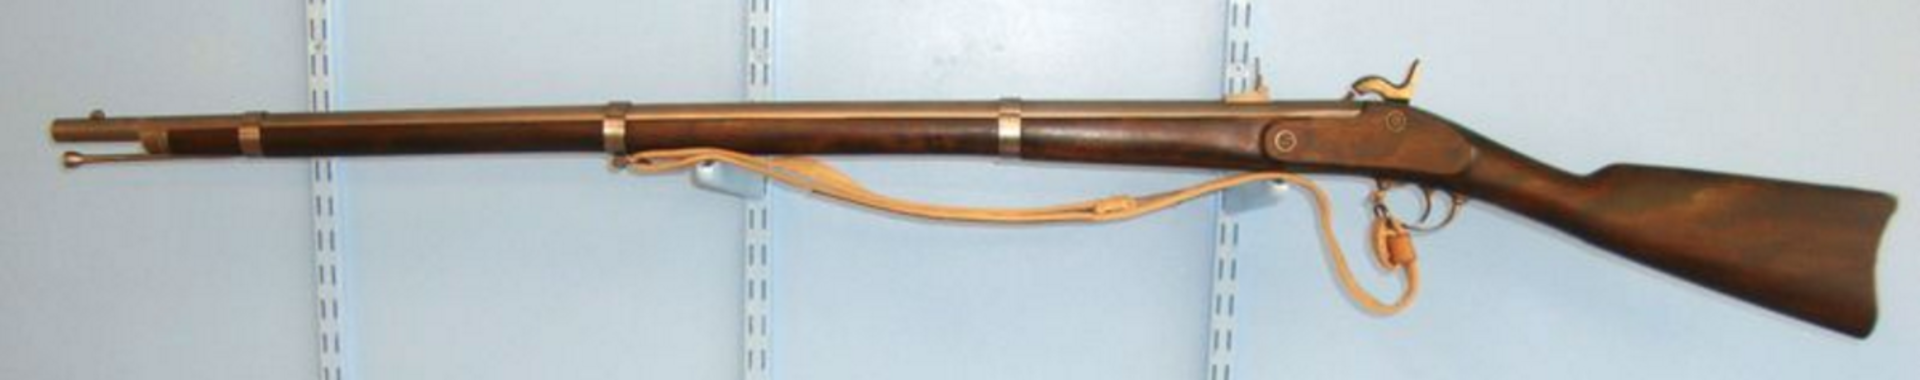 MINT, Springfield Model Of 1861 Percussion Rifle By Euro Arms Of America & Sling